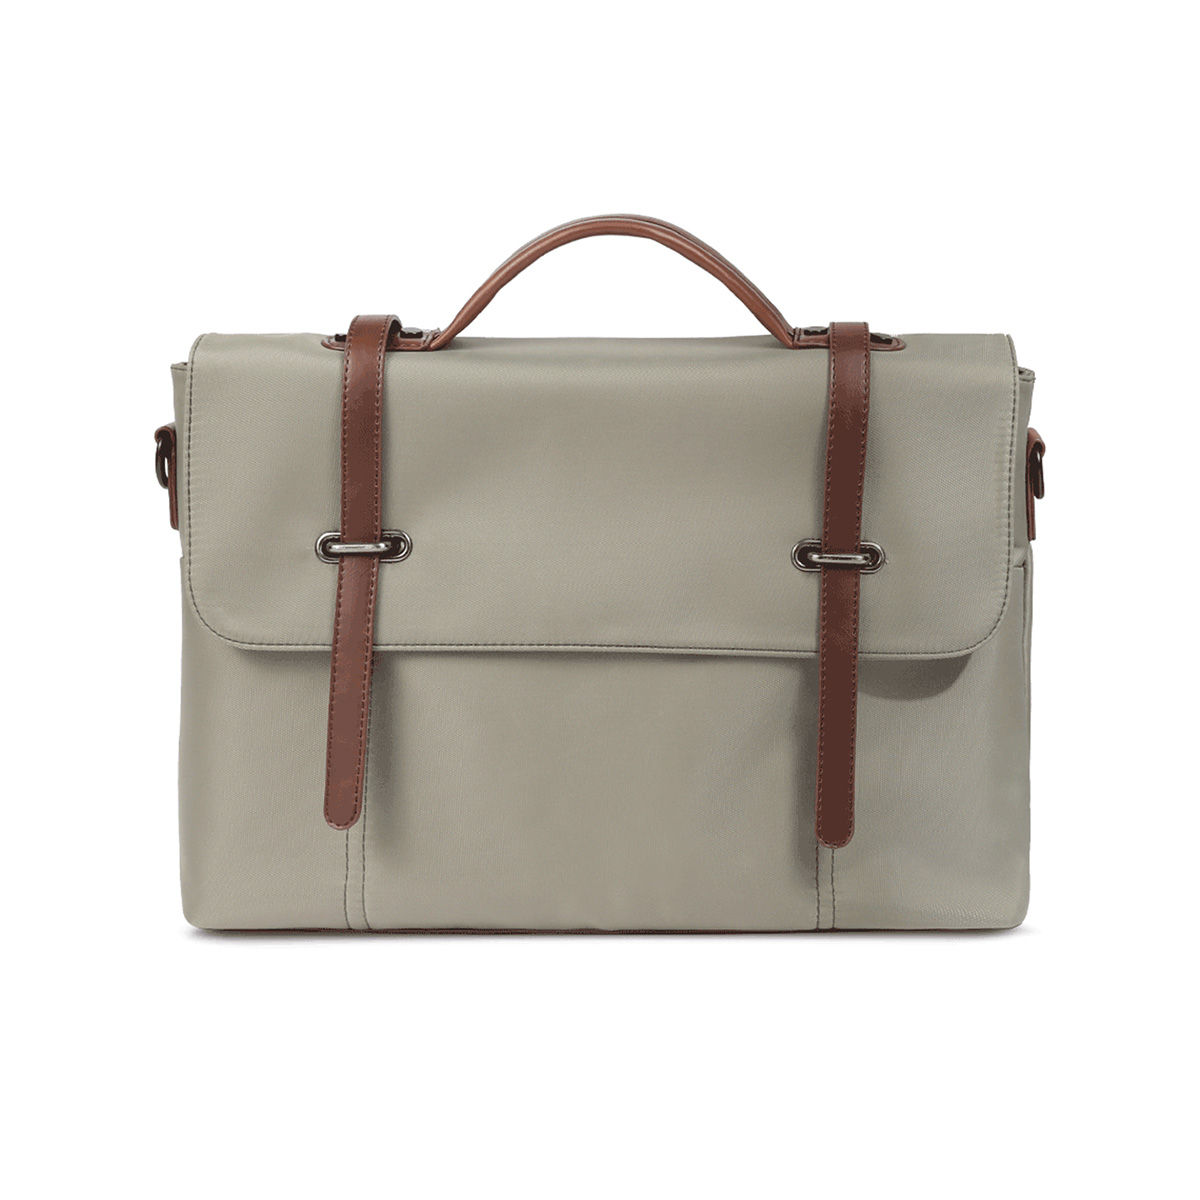 Scarters Retro 2.0, 15.6 inch Laptop & MacBook Briefcase Messenger Bag Matt  Grey: Buy Scarters Retro 2.0, 15.6 inch Laptop & MacBook Briefcase  Messenger Bag Matt Grey Online at Best Price in India | Nykaa